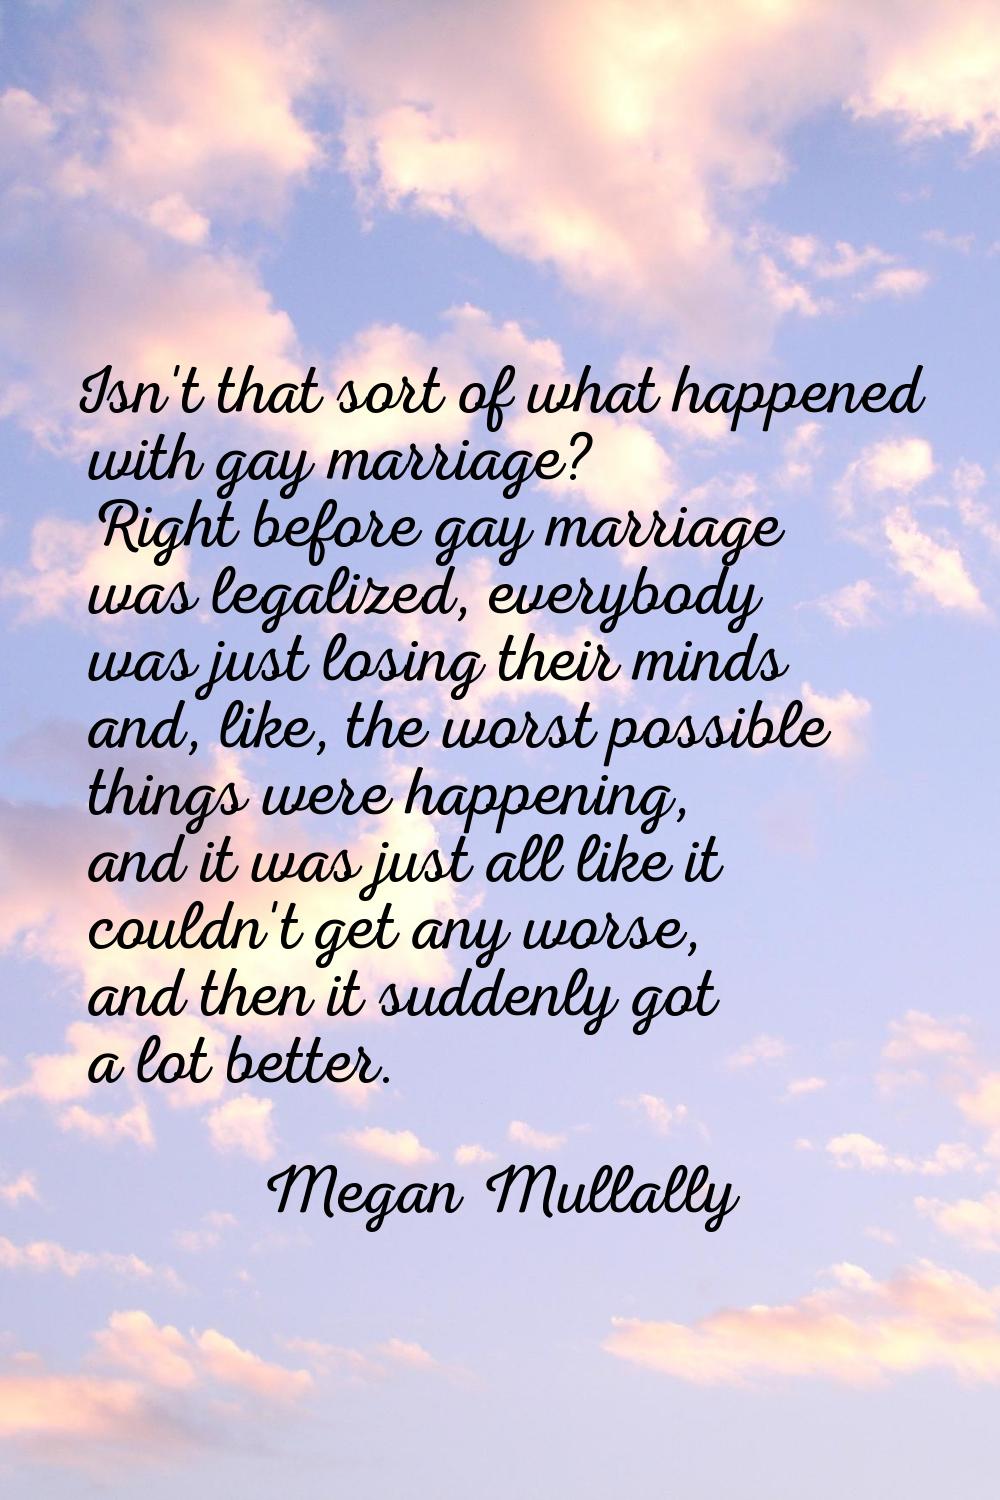 Isn't that sort of what happened with gay marriage? Right before gay marriage was legalized, everyb